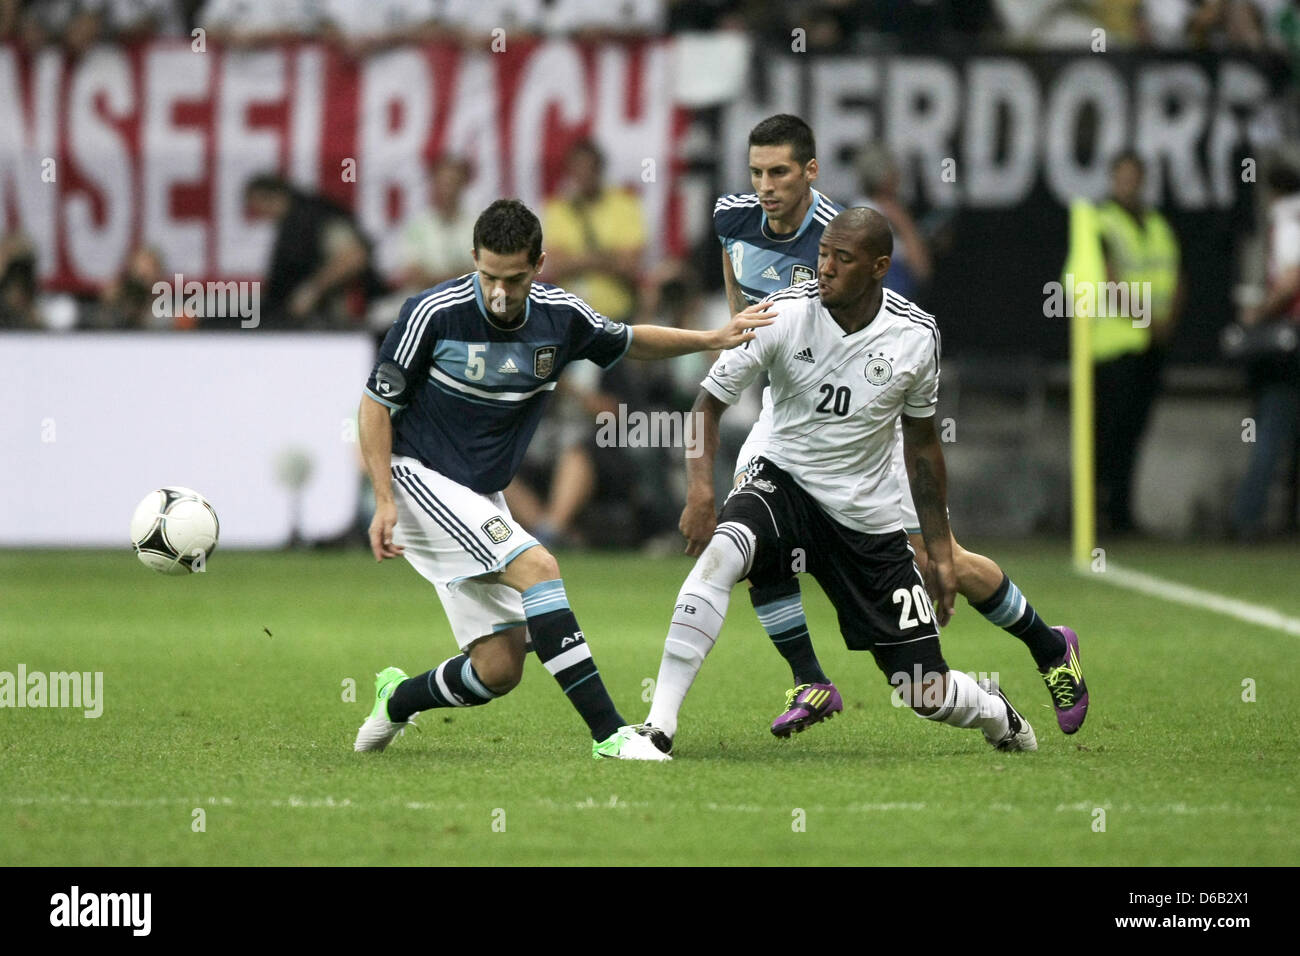 Germany's Jerome Boateng (R) vies for the ball with Argentina's Fernando Gago (L) and Jose Ernesto Sosa during their friendly soccer match Germany vs Argentina at Commerzbank-Arena stadium in Frankfurt Main, Germany, 15 August 2012. Photo: Fredrik von Erichsen dpa/lhe  +++(c) dpa - Bildfunk+++ Stock Photo